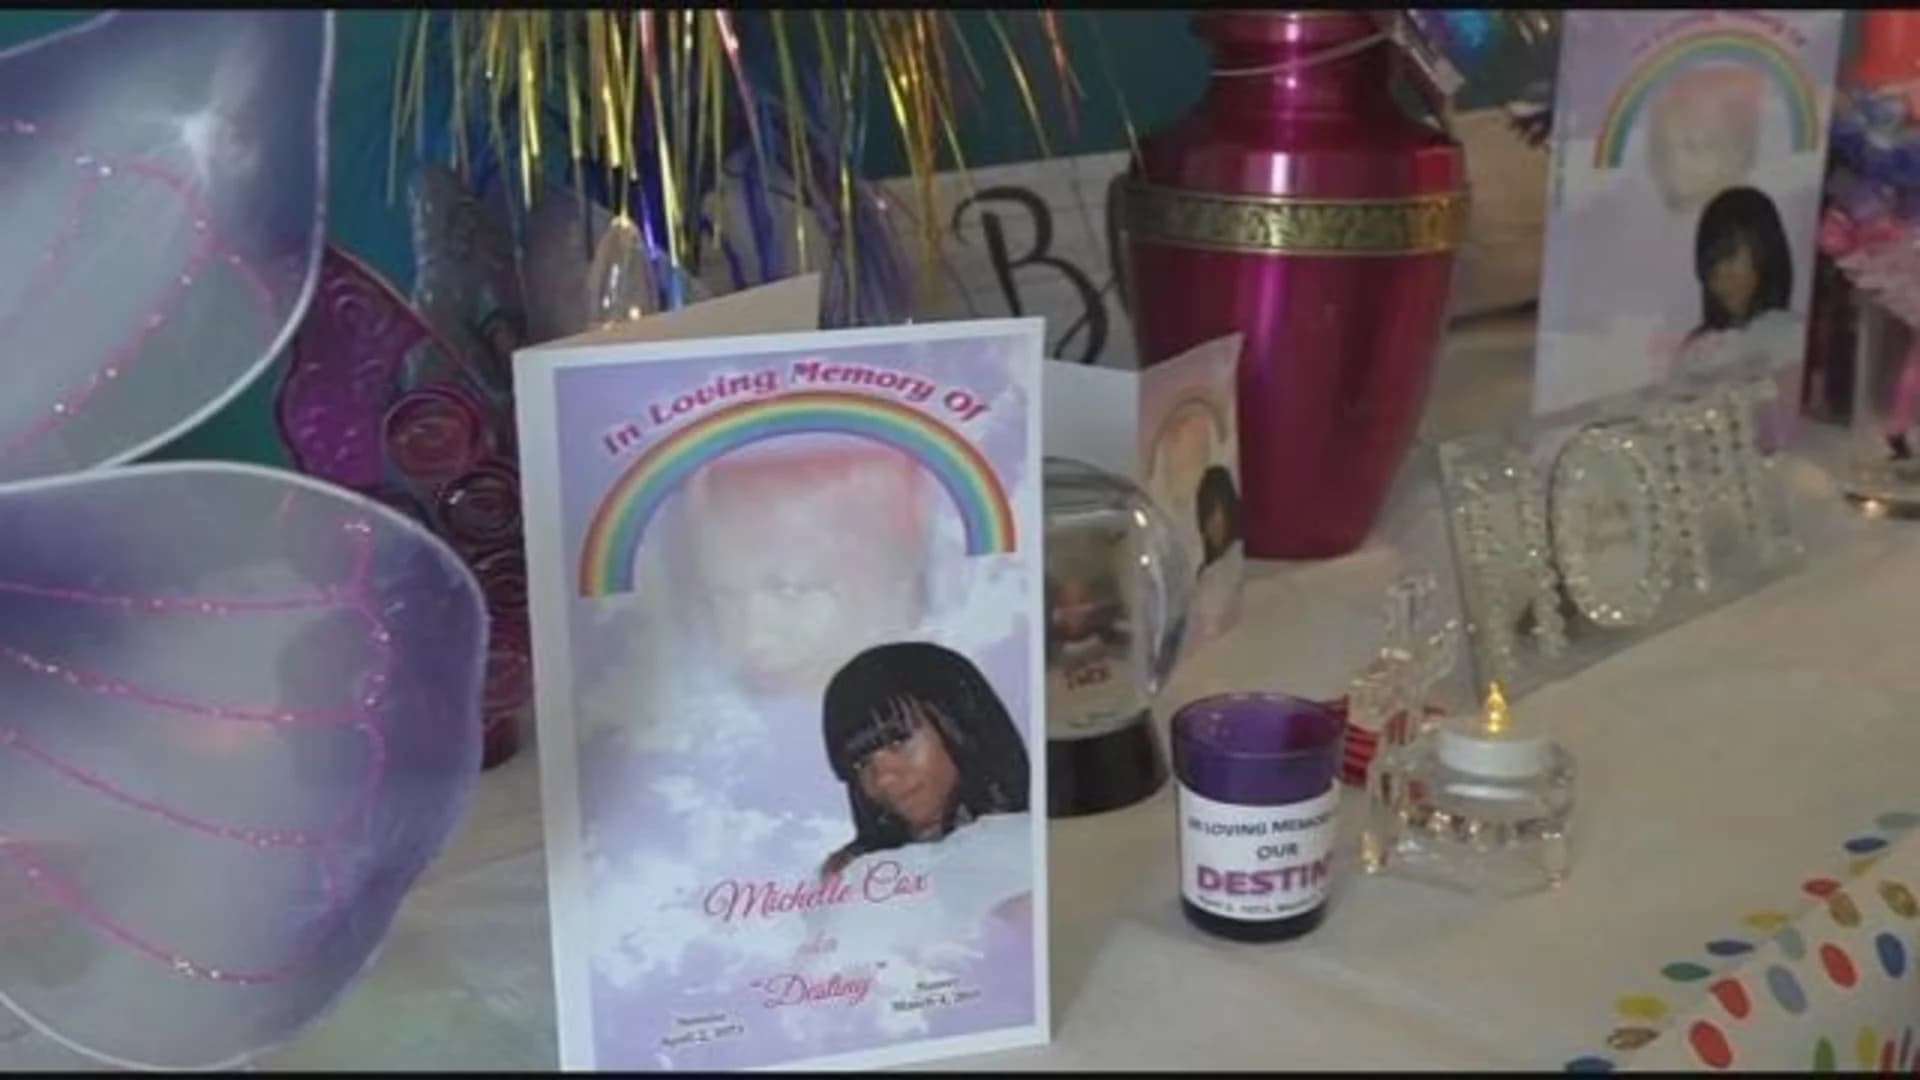 Family of woman fatally shot in BX building searches for answers 4 years later